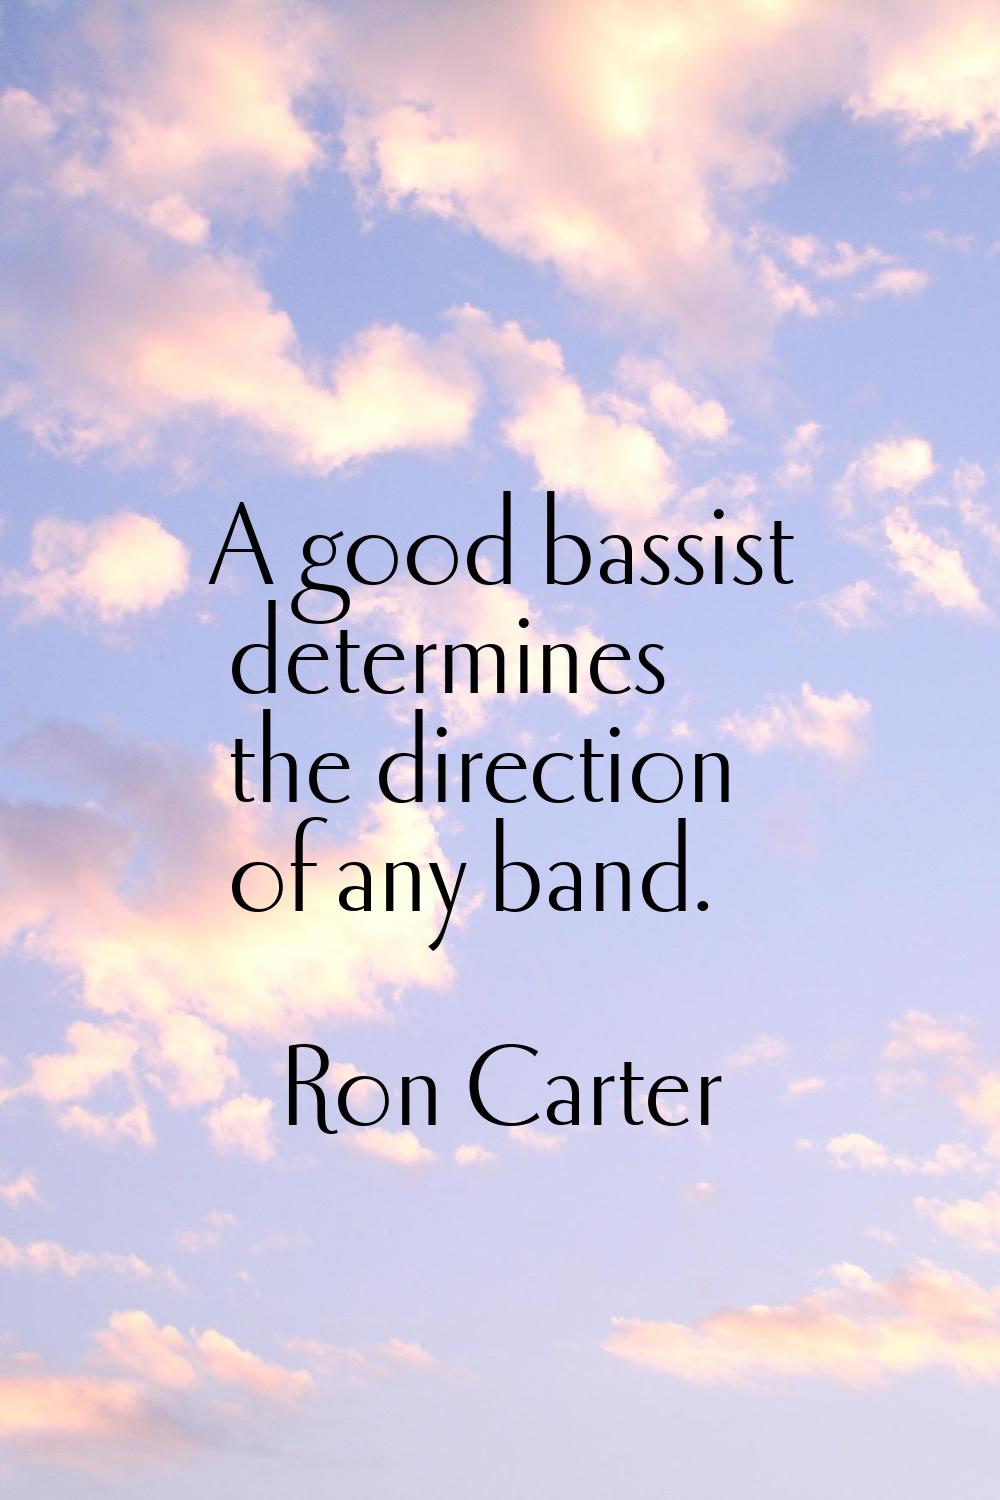 A good bassist determines the direction of any band.